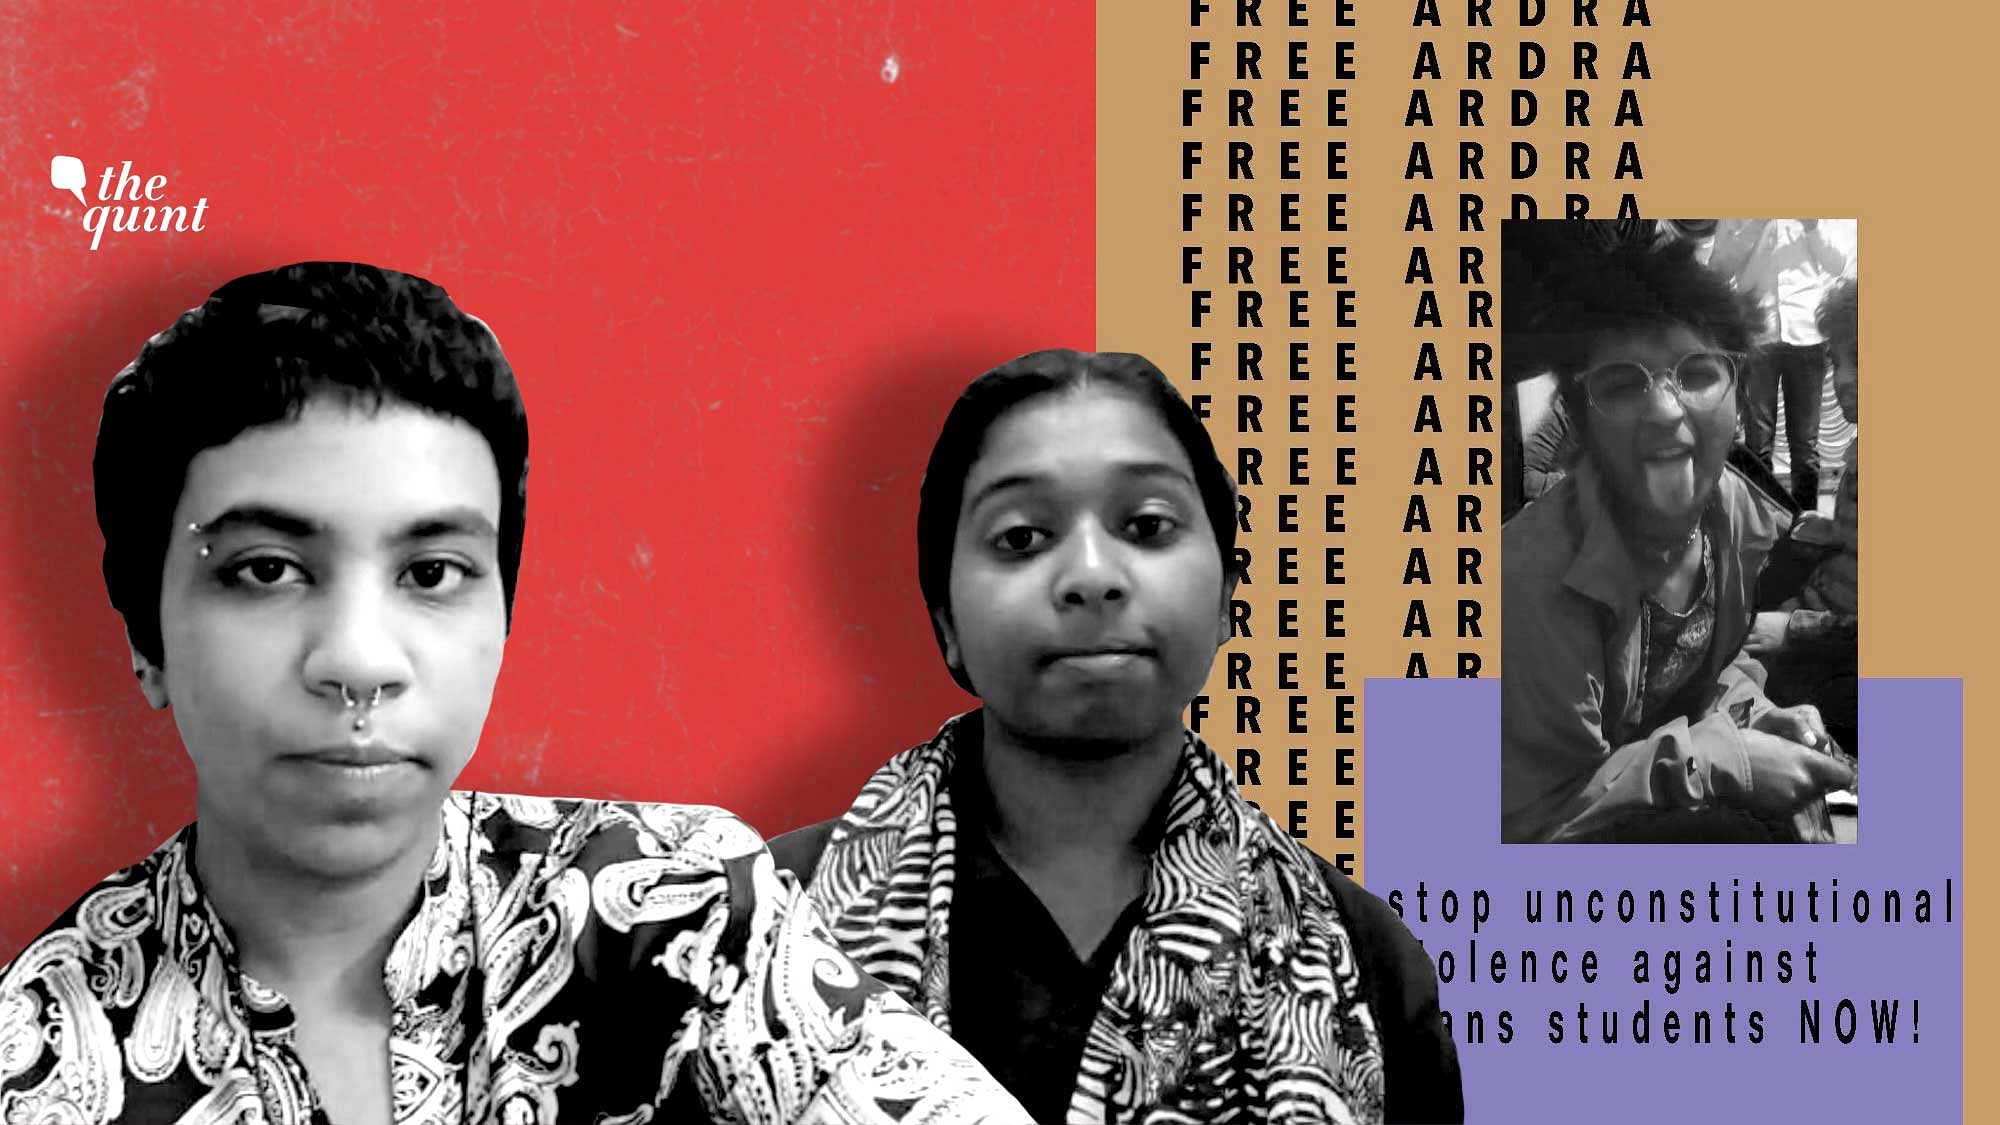 Students and protesters react to the recent arrests of activists Amulya, 19, and Ardra, 24, from Bengaluru on charges of sedition and inciting communal disharmony.